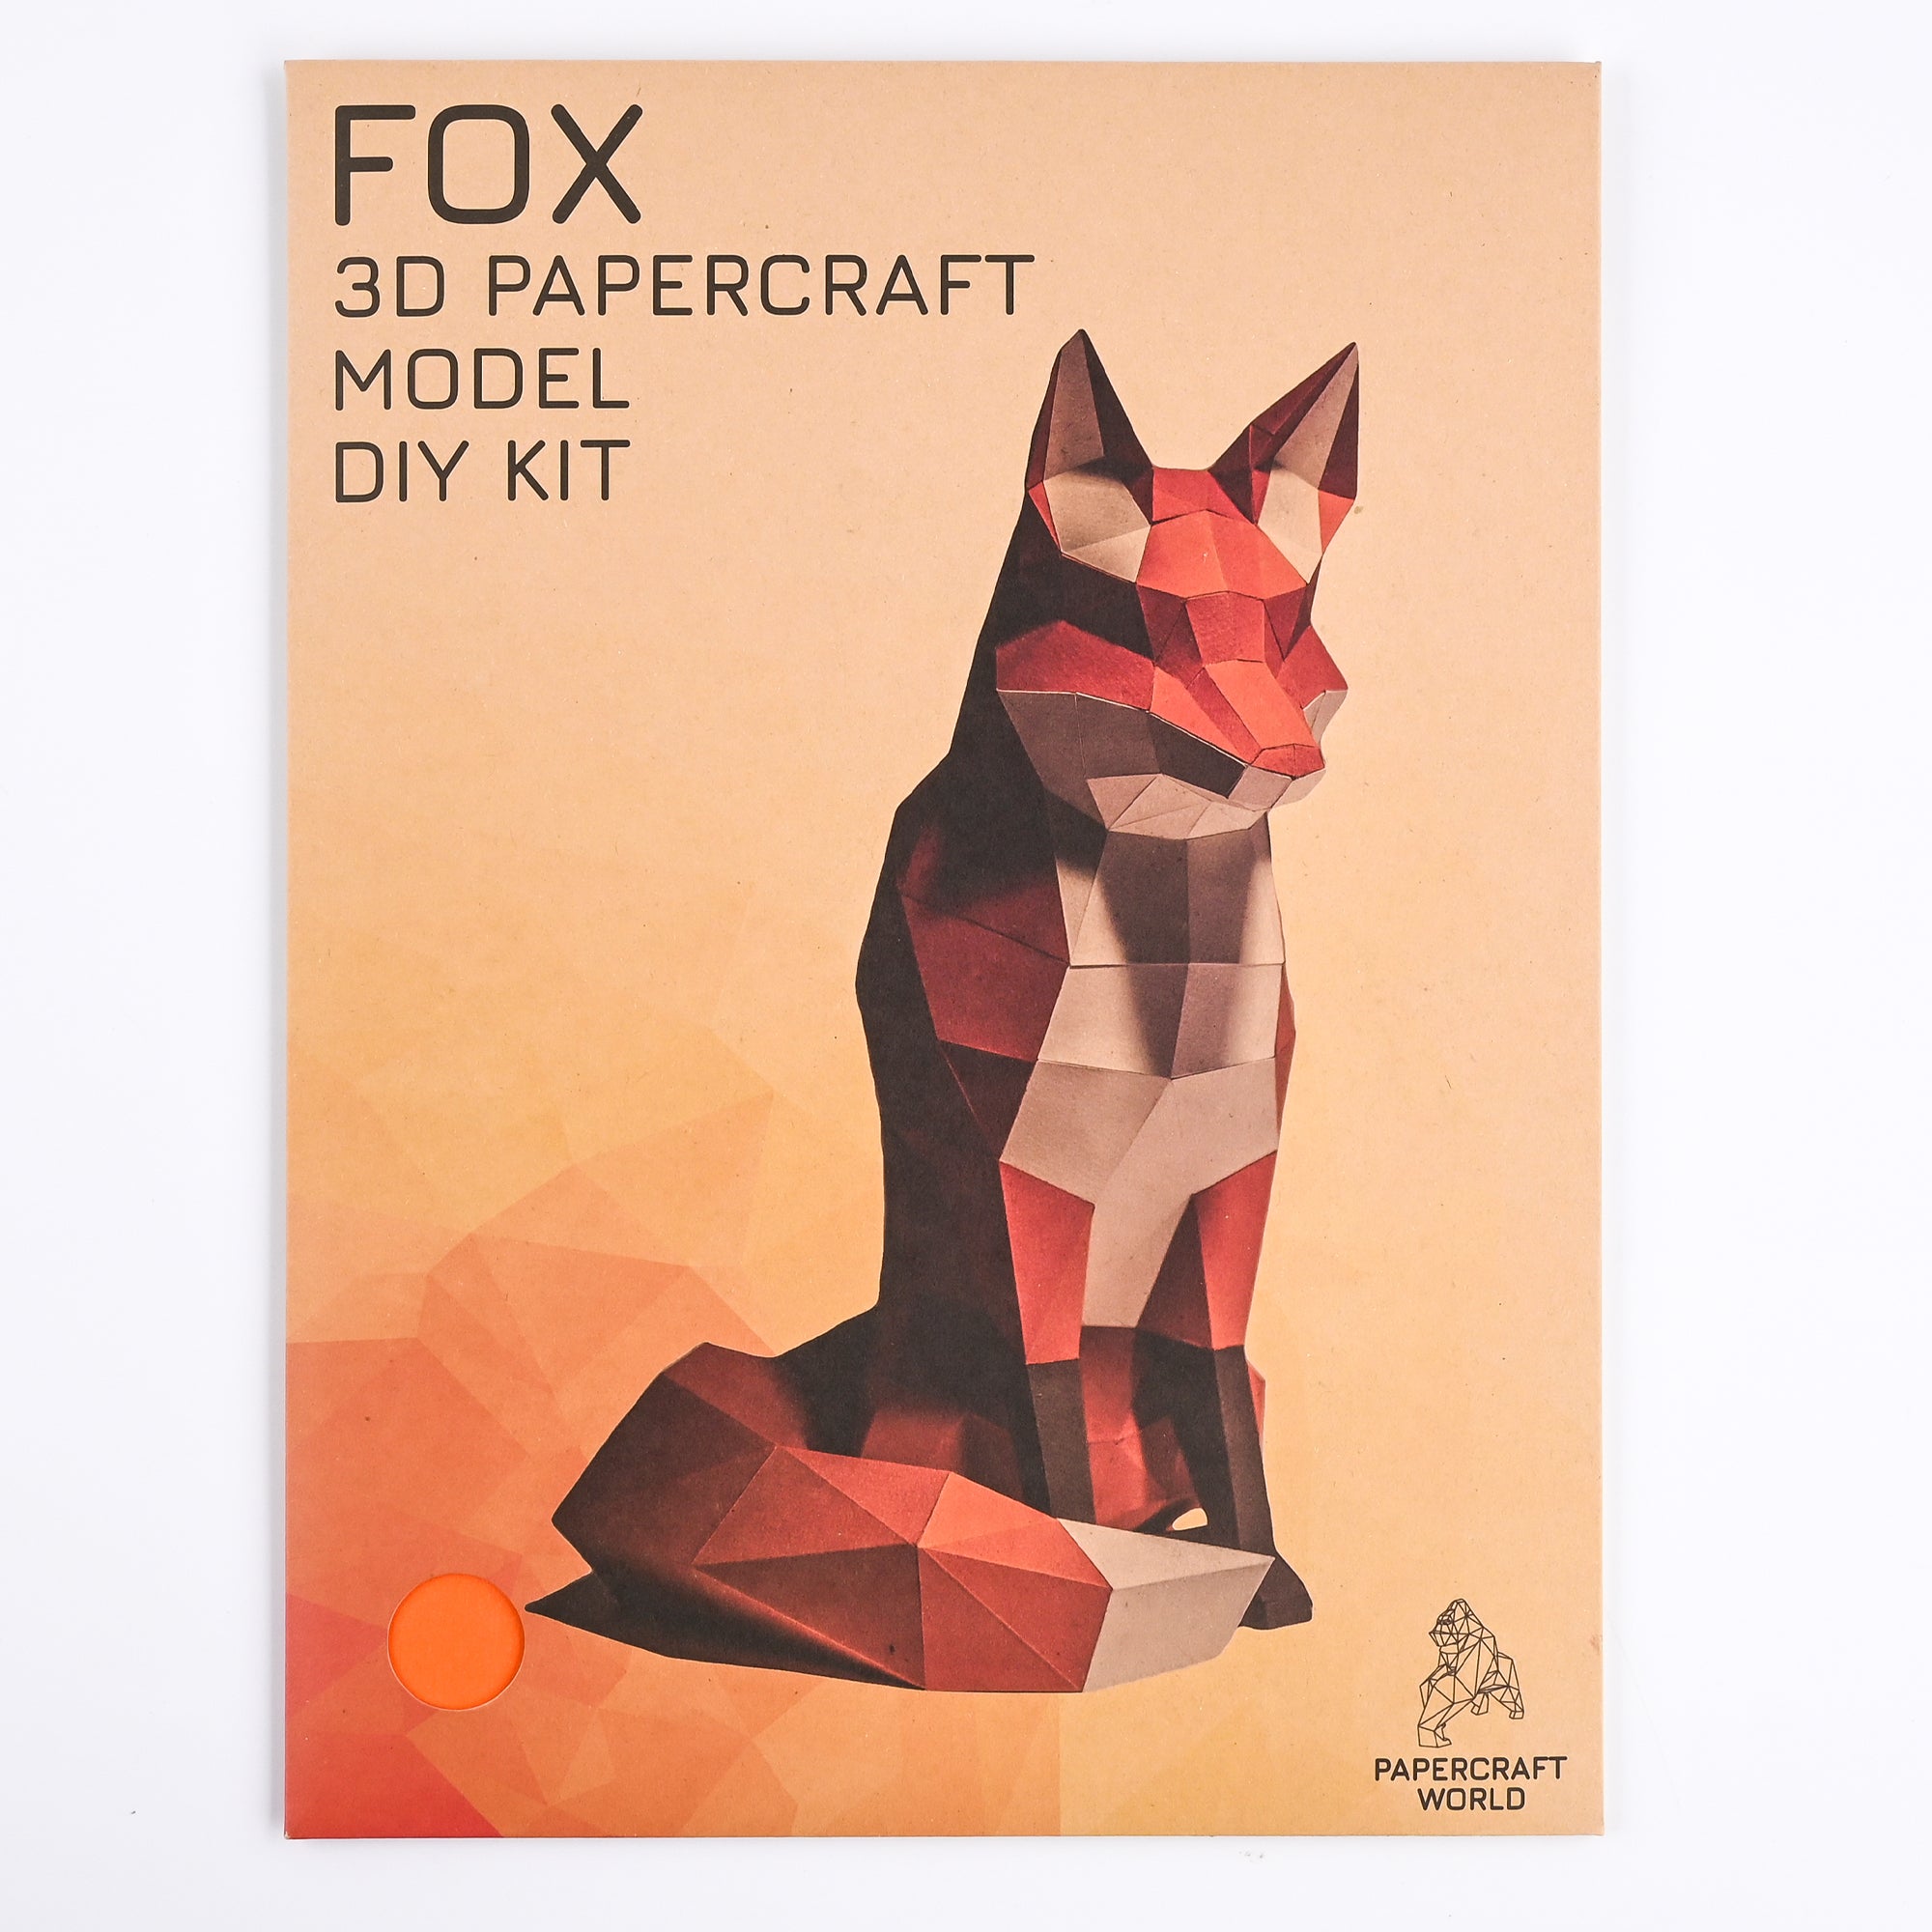 Papercraft fox packaging cover. In the upper-left corner is black text reading: Fox, 3 D papercraft model DIY kit. Background is a faded peach color that gets darker as you look down to the bottom-left corner. You can see faded geometric shapes in the bottom-left corner. In the middle is the finished paper fox. In the right-bottom corner is the Papercraft World text and logo of a geometric black gorilla outline.